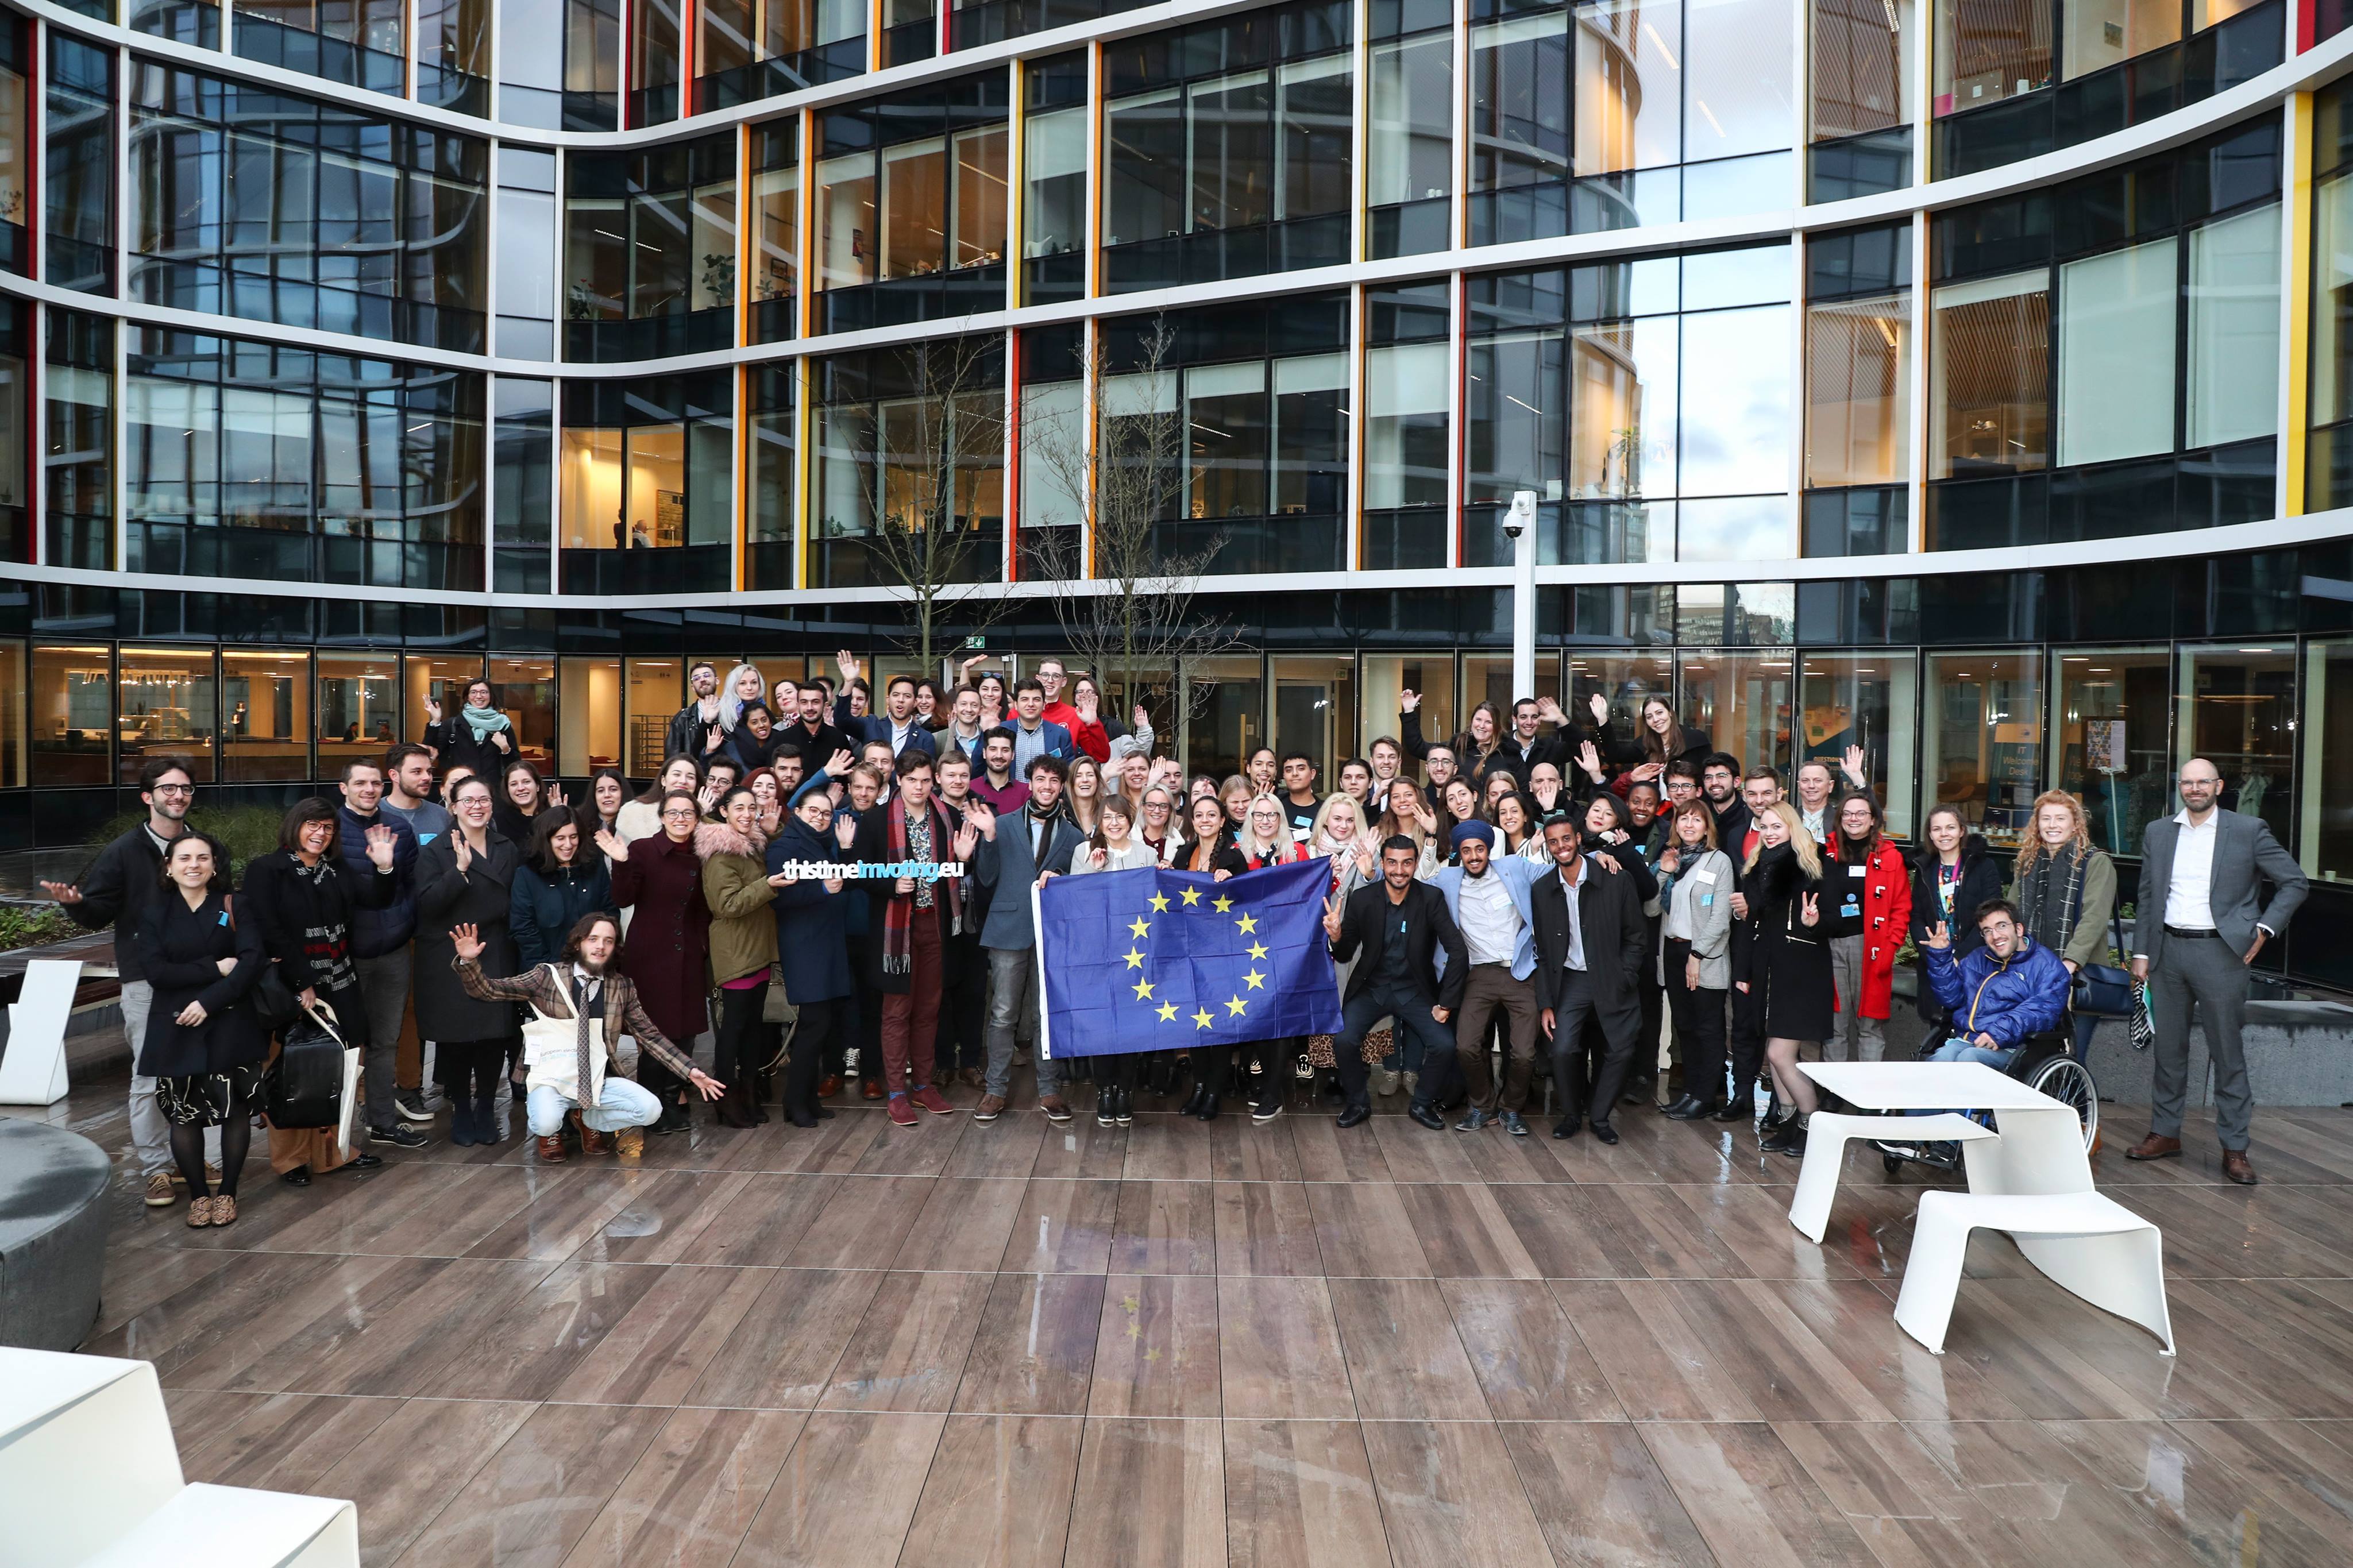 You are currently viewing Have your say in what the European Parliament should do for youth